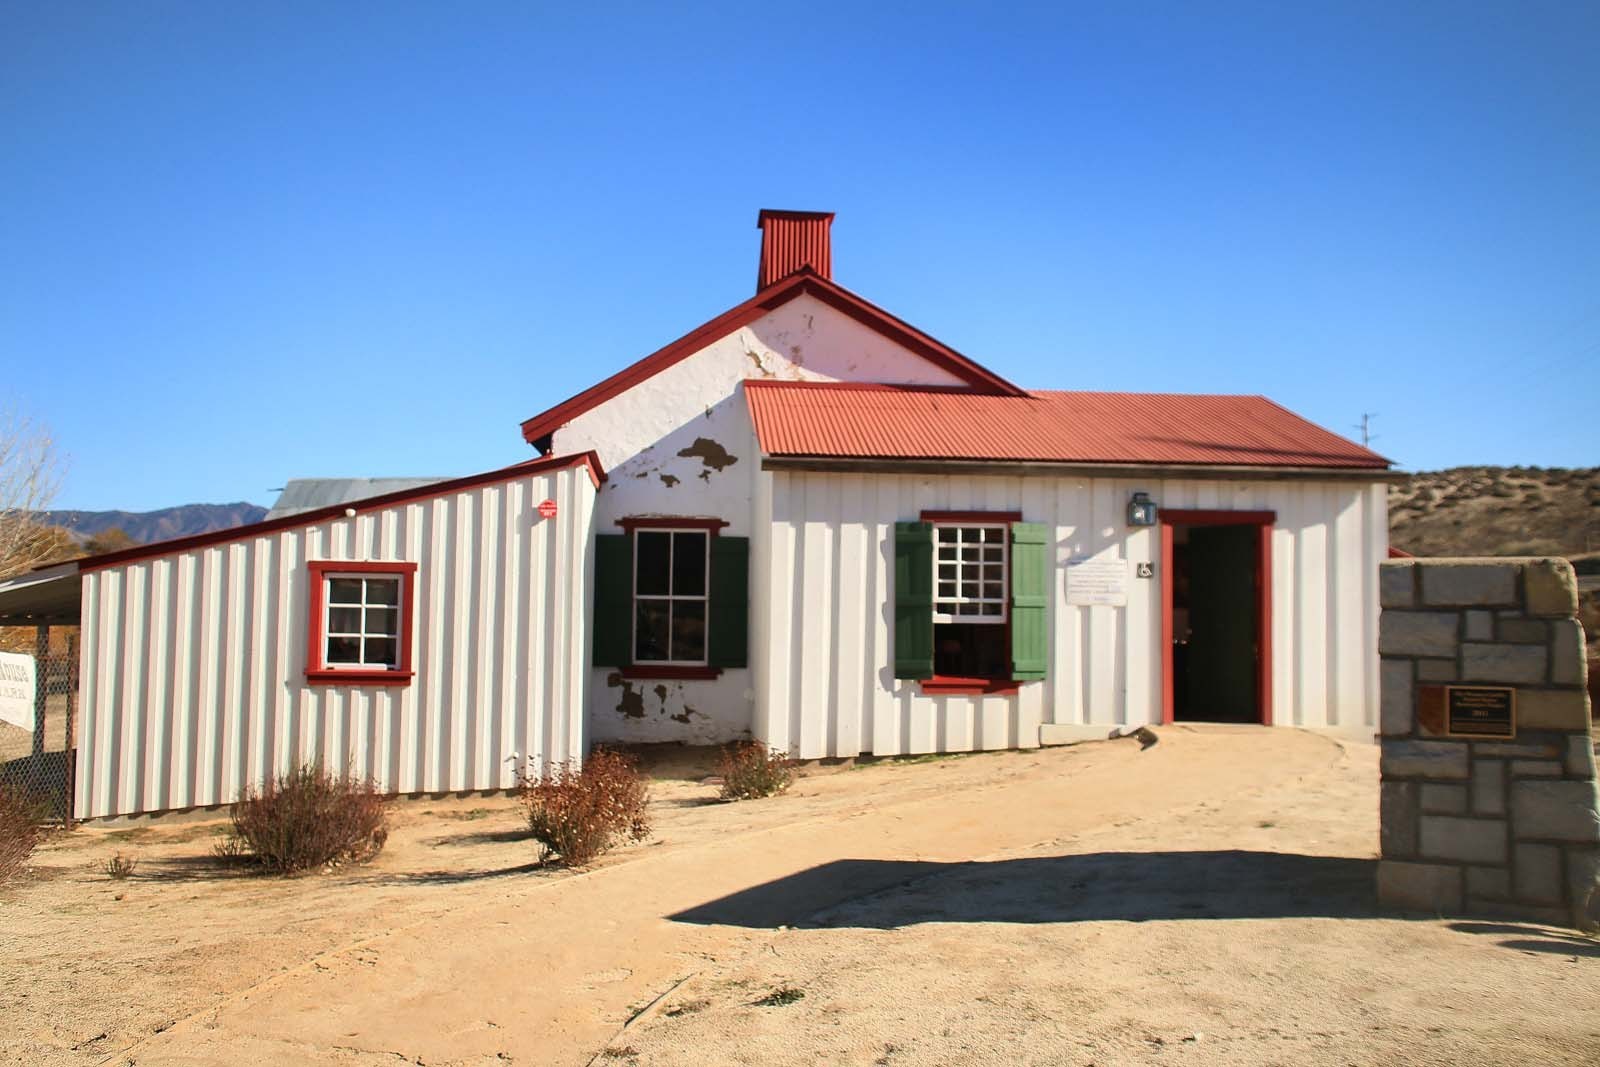 Get a glimpse into San Diego's fading history at the Warner-Carrillo Rancho House, once used as a stagecoach stop for the Butterfield Stage Line.